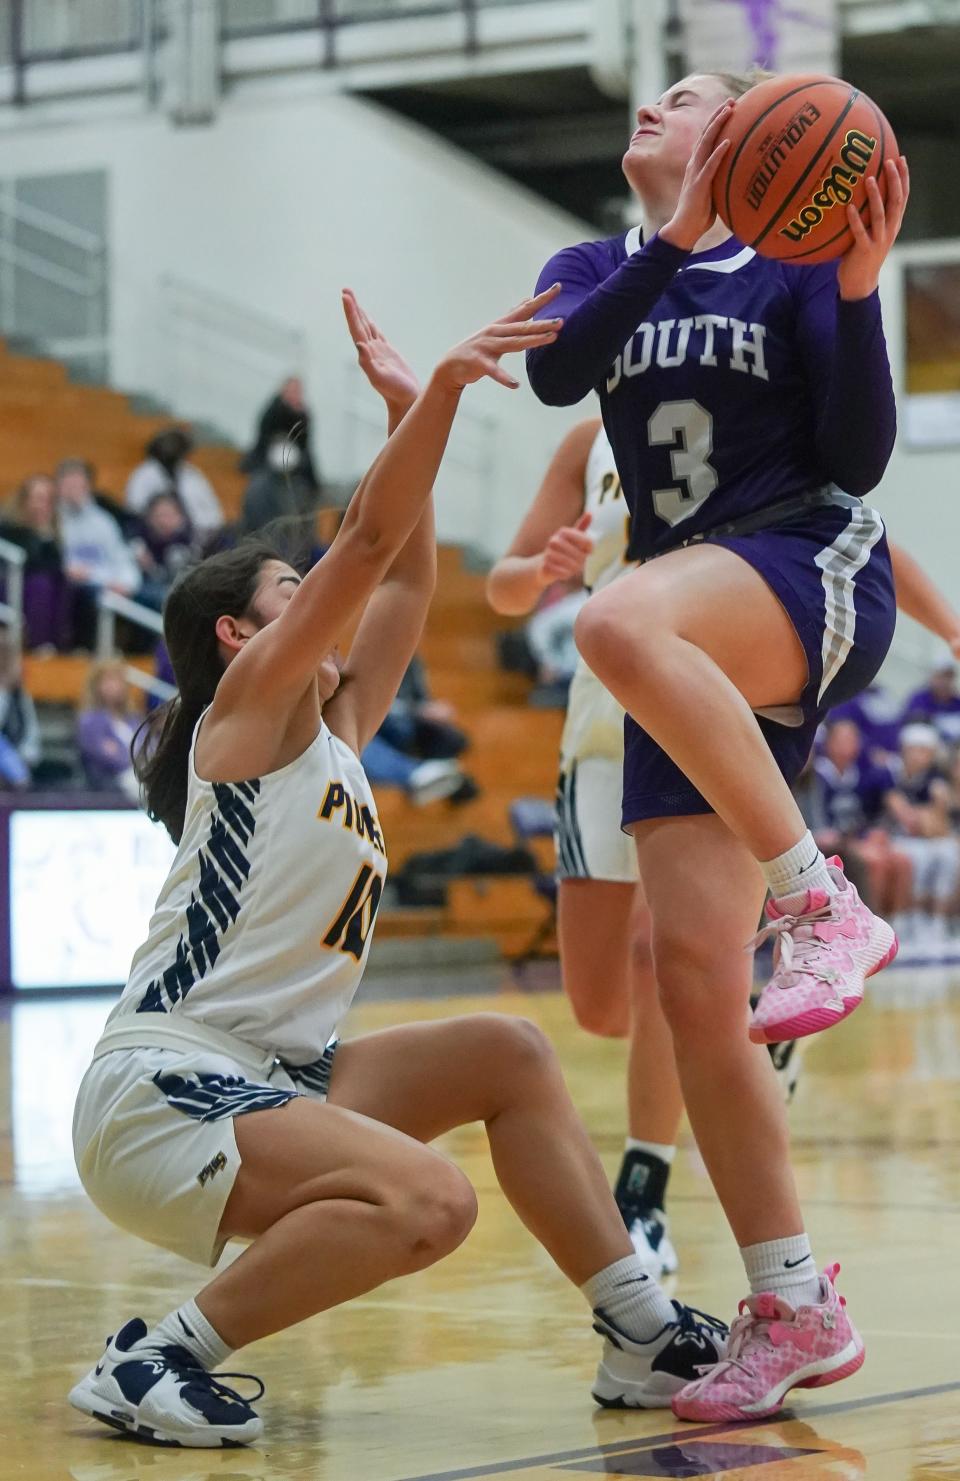 Bloomington South’s Carlie Pedersen (3) drives to the basket against Mooresville’s Sydney Hardy (10) during their IHSAA girls’ basketball sectional first round game at South on Tuesday, Jan. 31, 2023.